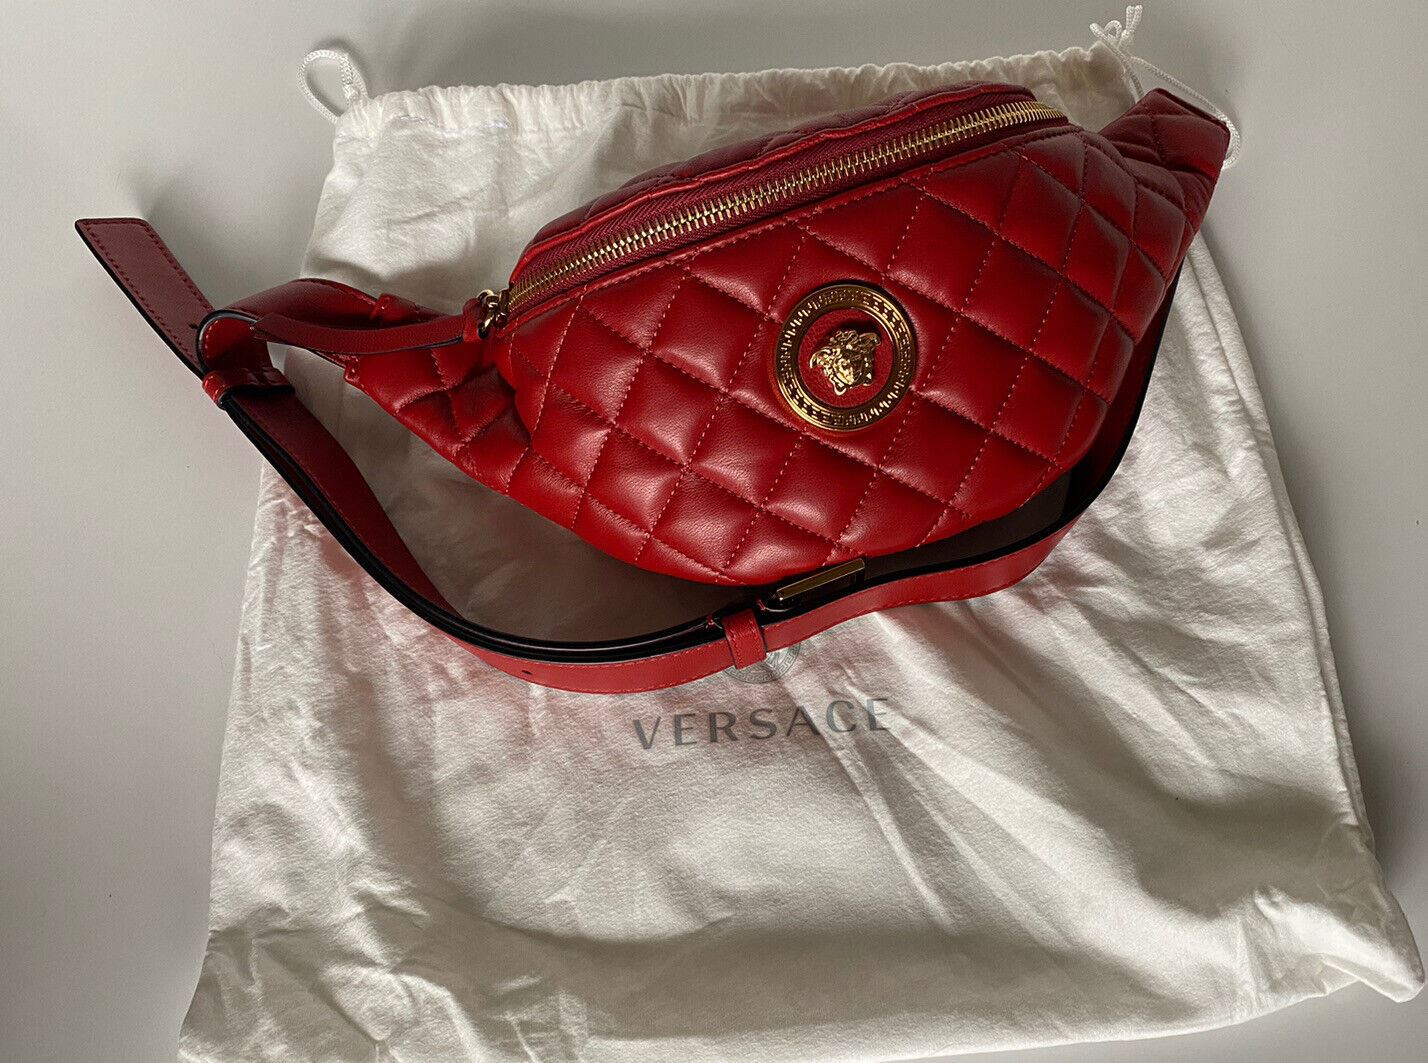 NWT Versace Women's Quilted Lamb Leather Red Belt /Waist/Body Bag 1A02151 Italy